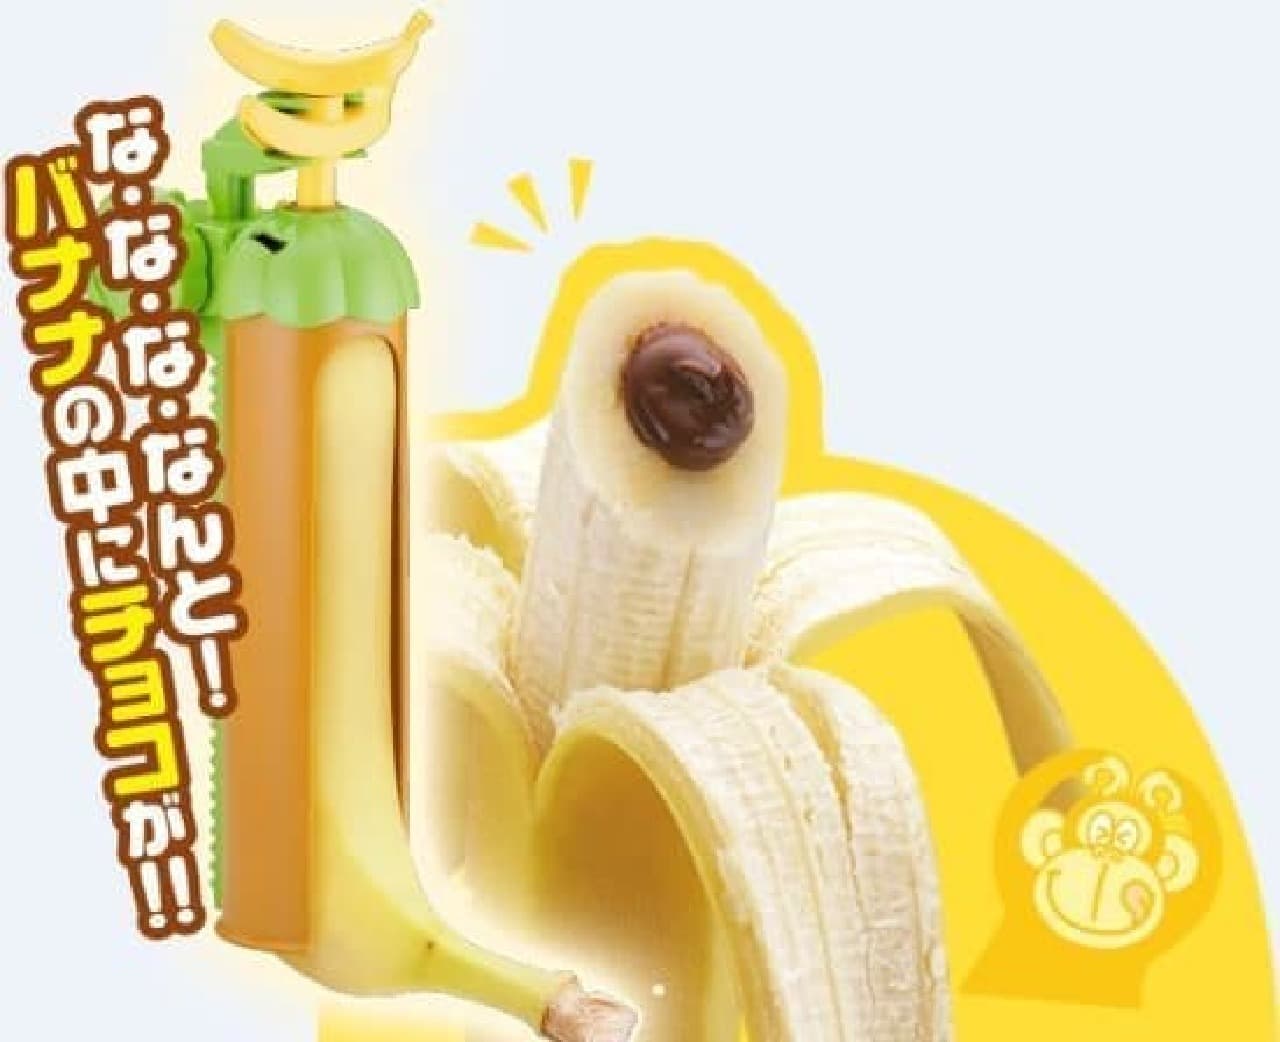 When you bite into a banana... chocolate comes out from inside...?